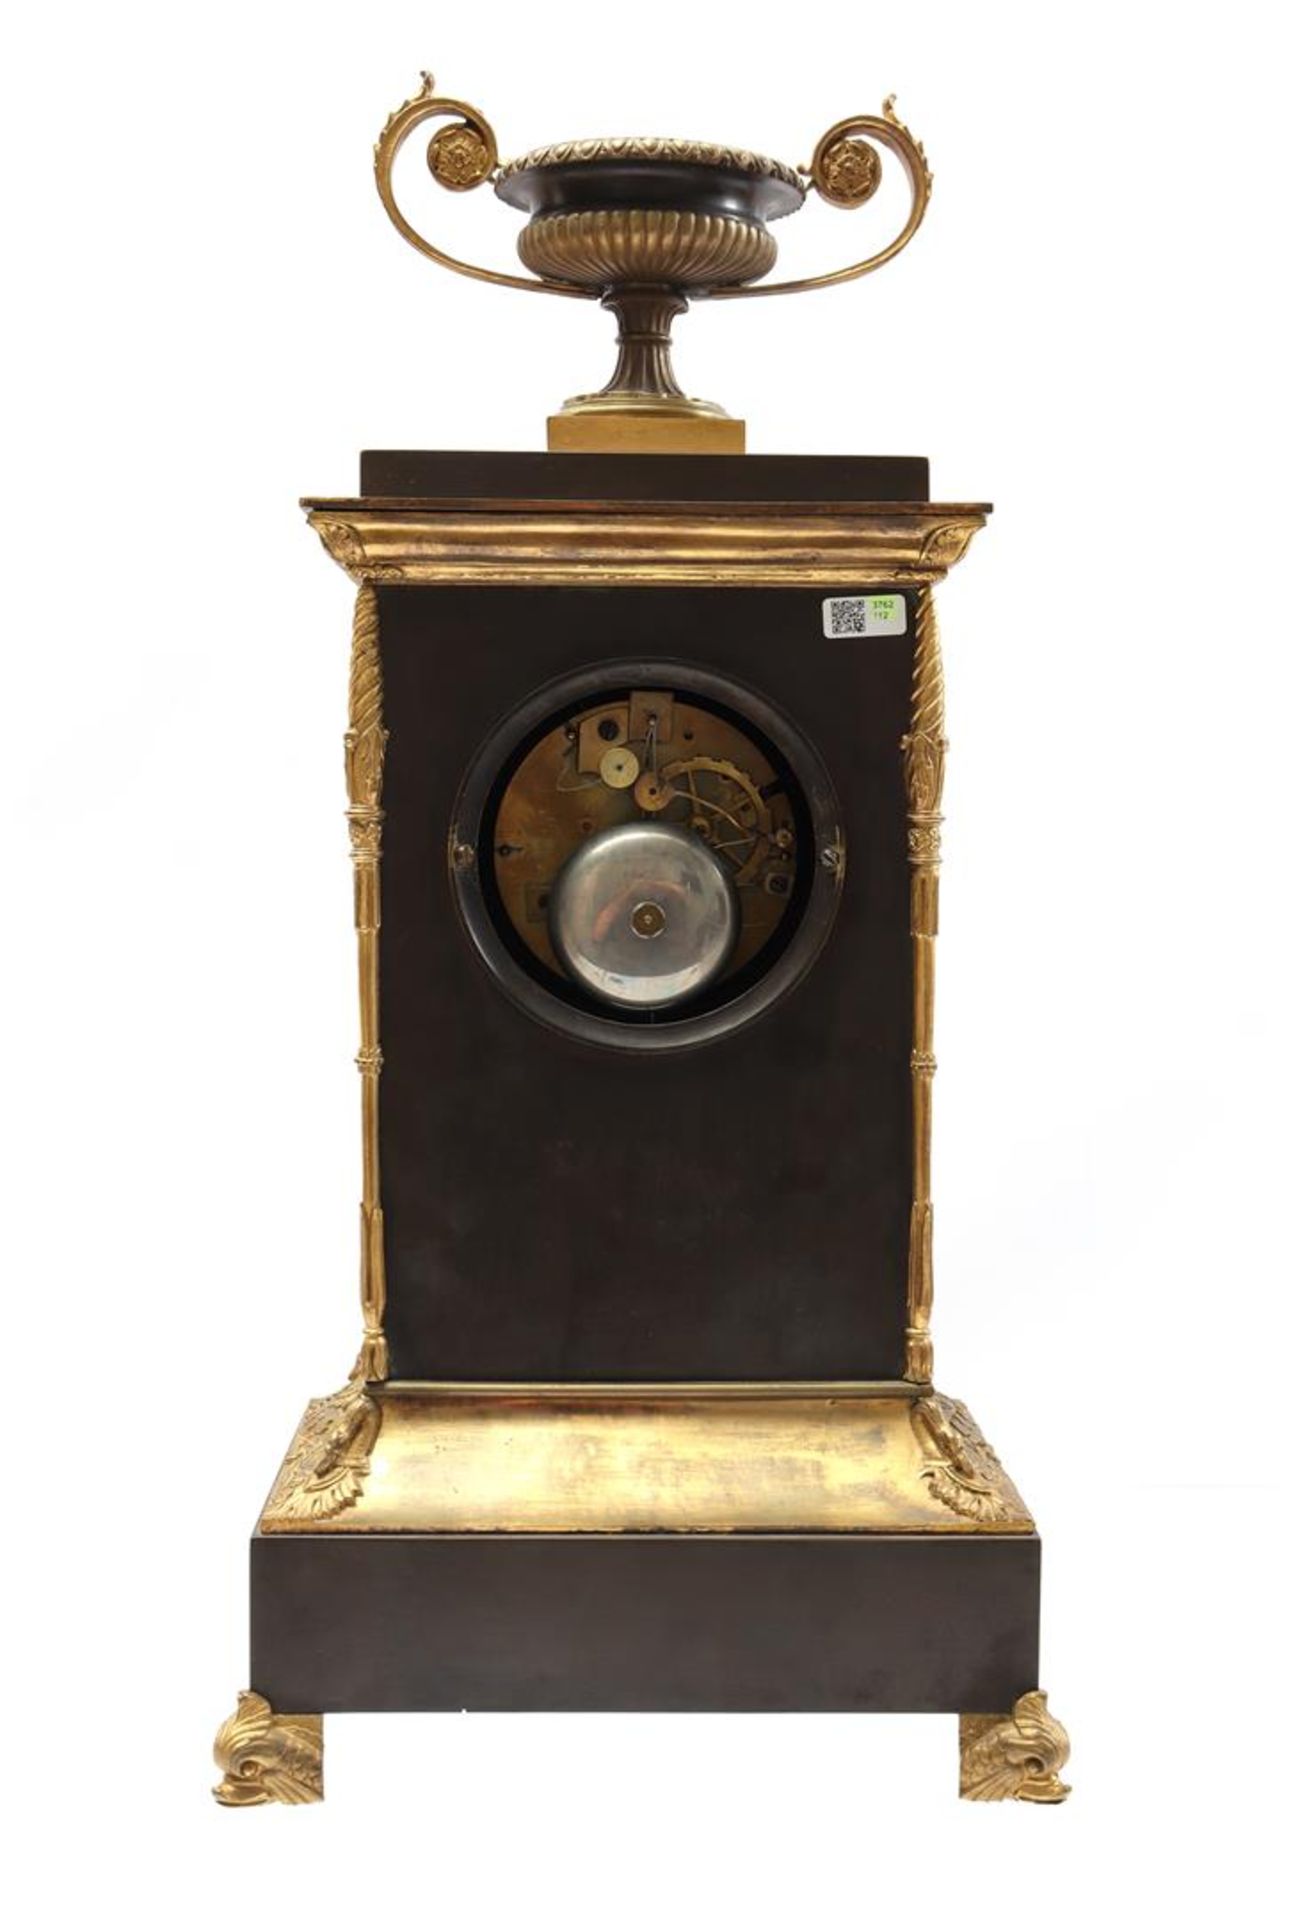 Brass table clock - Image 3 of 5